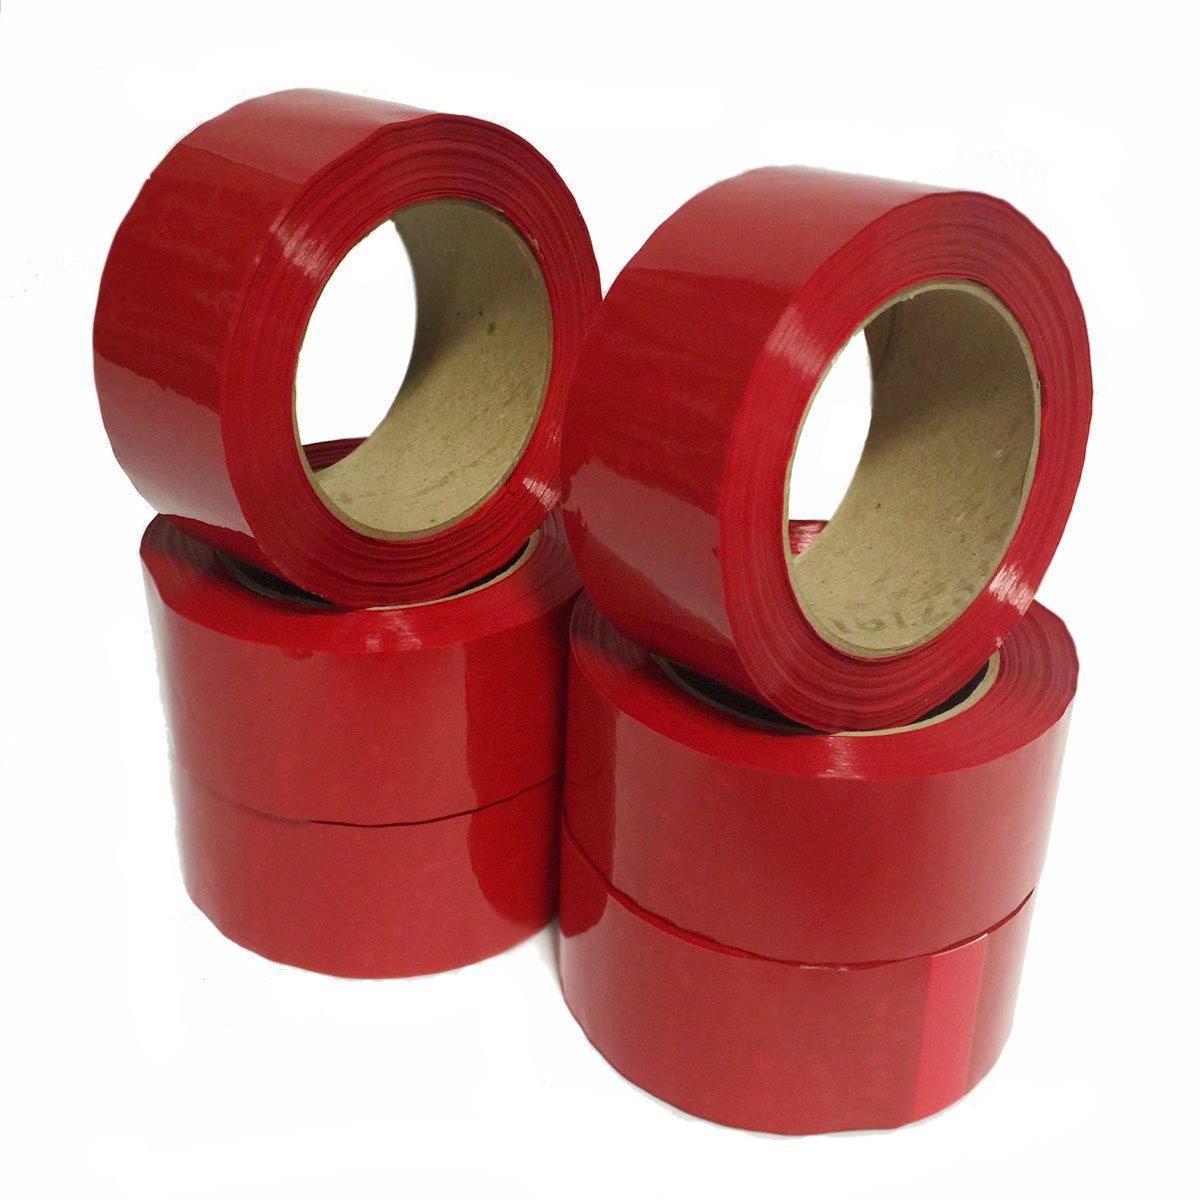 RED Color Tape 2 Wide 110yd 12pk tape,packaging,box,adhesiveshipping  supplies